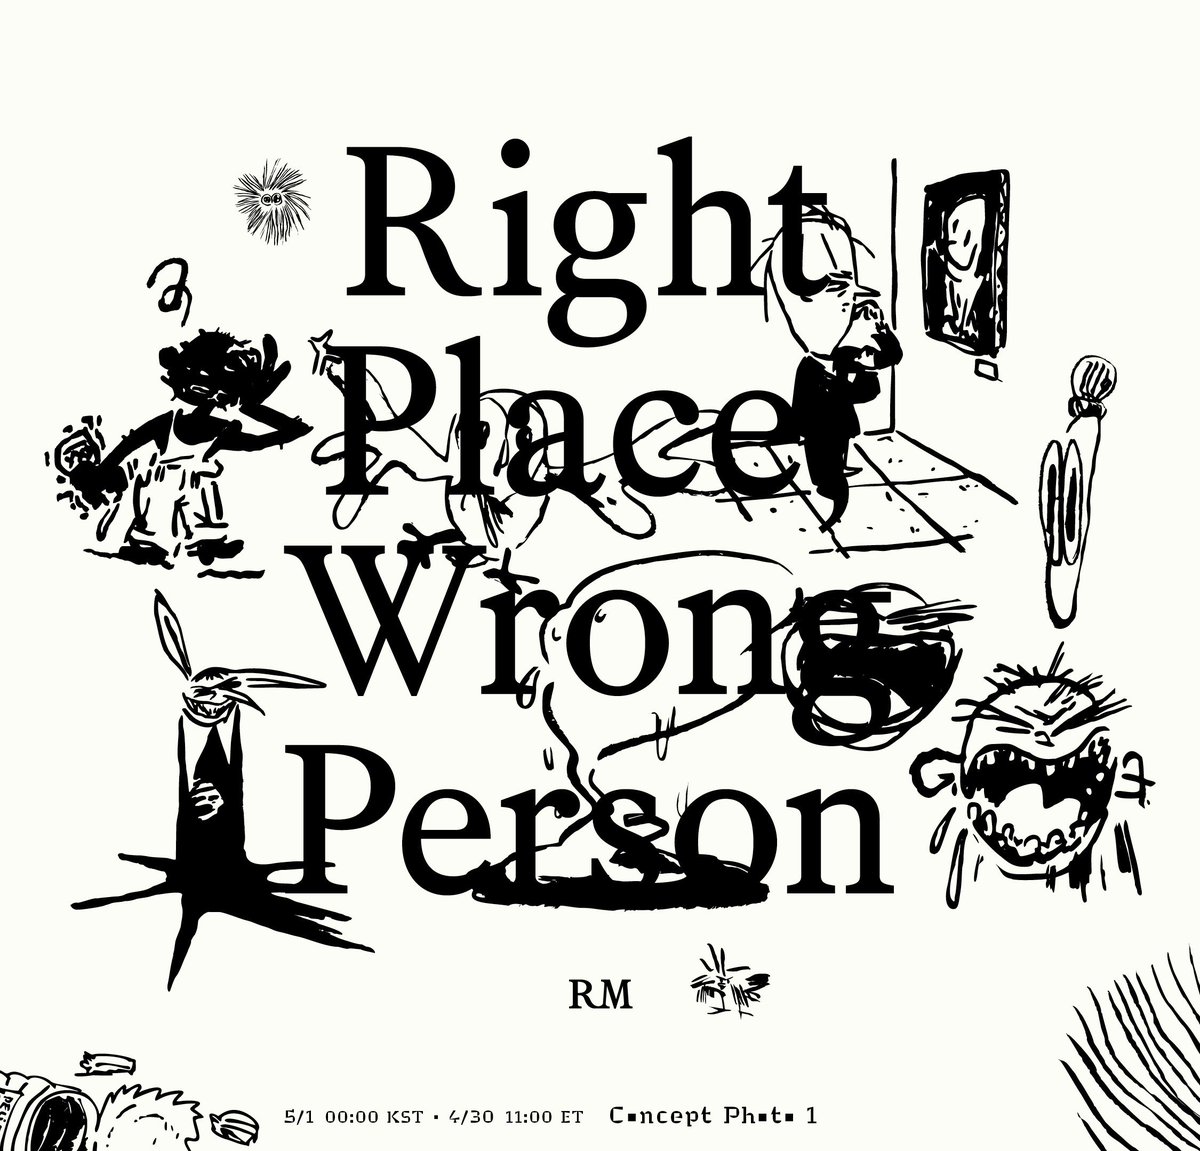 RT + REPLY ‼️

RM IS COMING
RPWP CONCEPT PHOTO 1 
RIGHT PLACE WRONG PERSON
#RM #RightPlaceWrongPerson